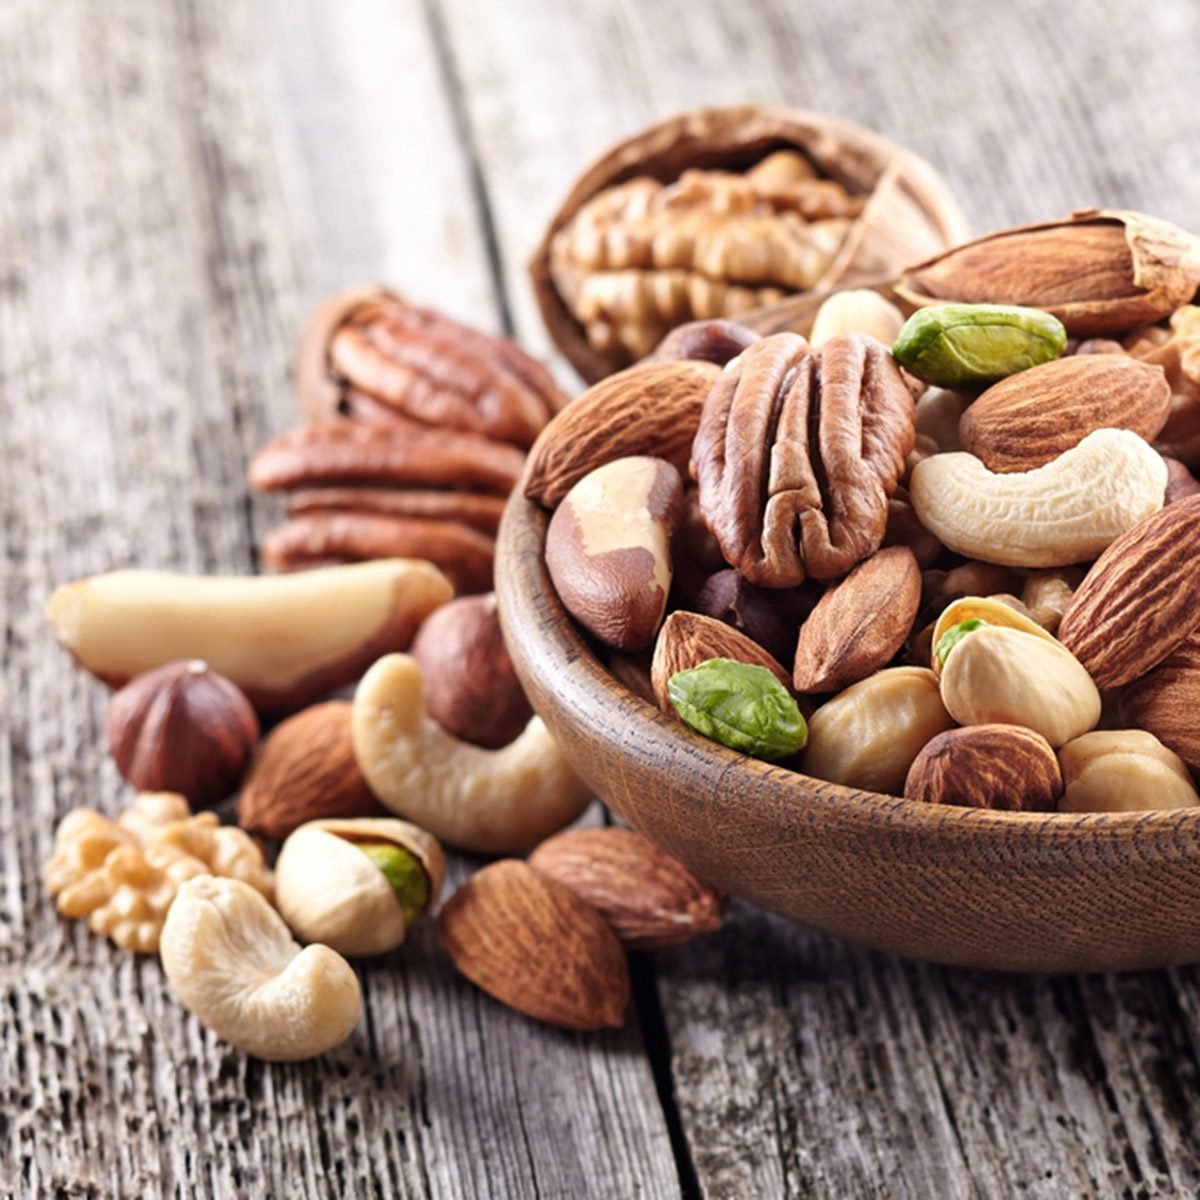 Nuts mix in a wooden plate; Shutterstock ID 355672364